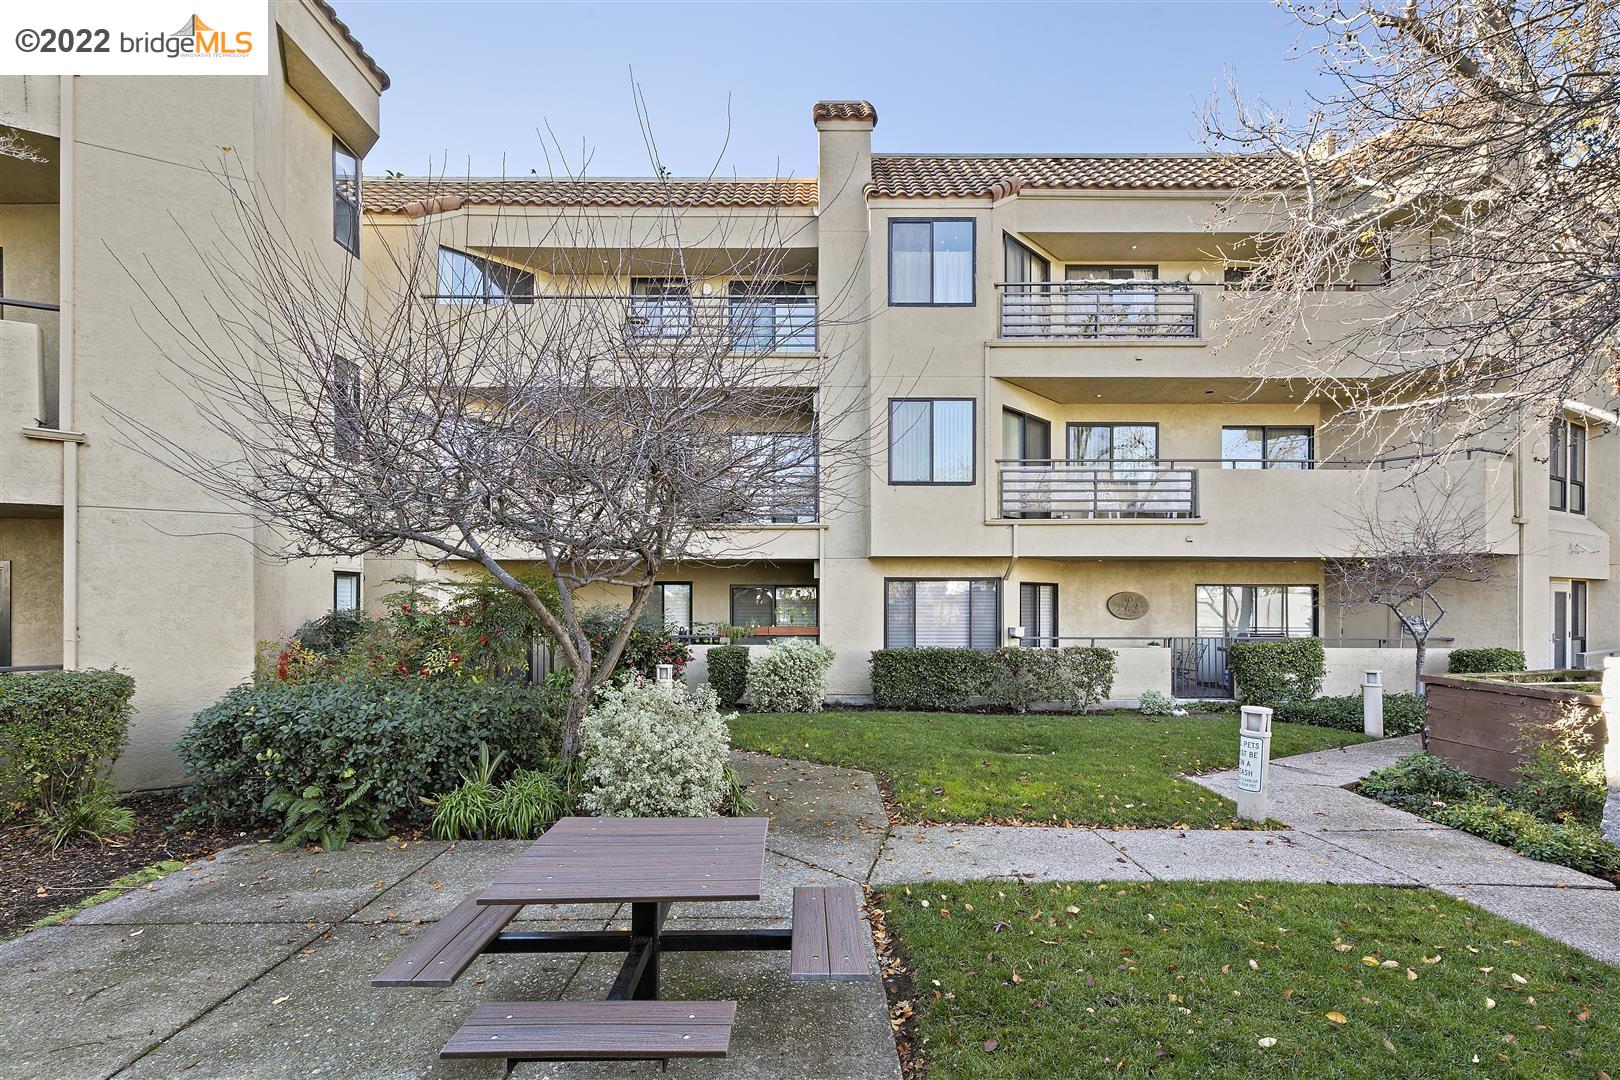 Centrally-located Downtown Walnut Creek condo on a hill overlooking Broadway Plaza. Steps away from Nordstrom, Starbucks, Safeway and all the additional Broadway Plaza shops and restaurants! Minutes from BART and highway 680 & 24! This charming two bedroom, two bath condo is full of bright, natural light with custom cabinets, stainless steel appliances and granite counters, hardwood flooring, in-unit full-size washer and dryer and two balconies. This well-managed complex features secured gated private parking, video security system, secured package locker in lobby, coded secured elevator, and private garden!